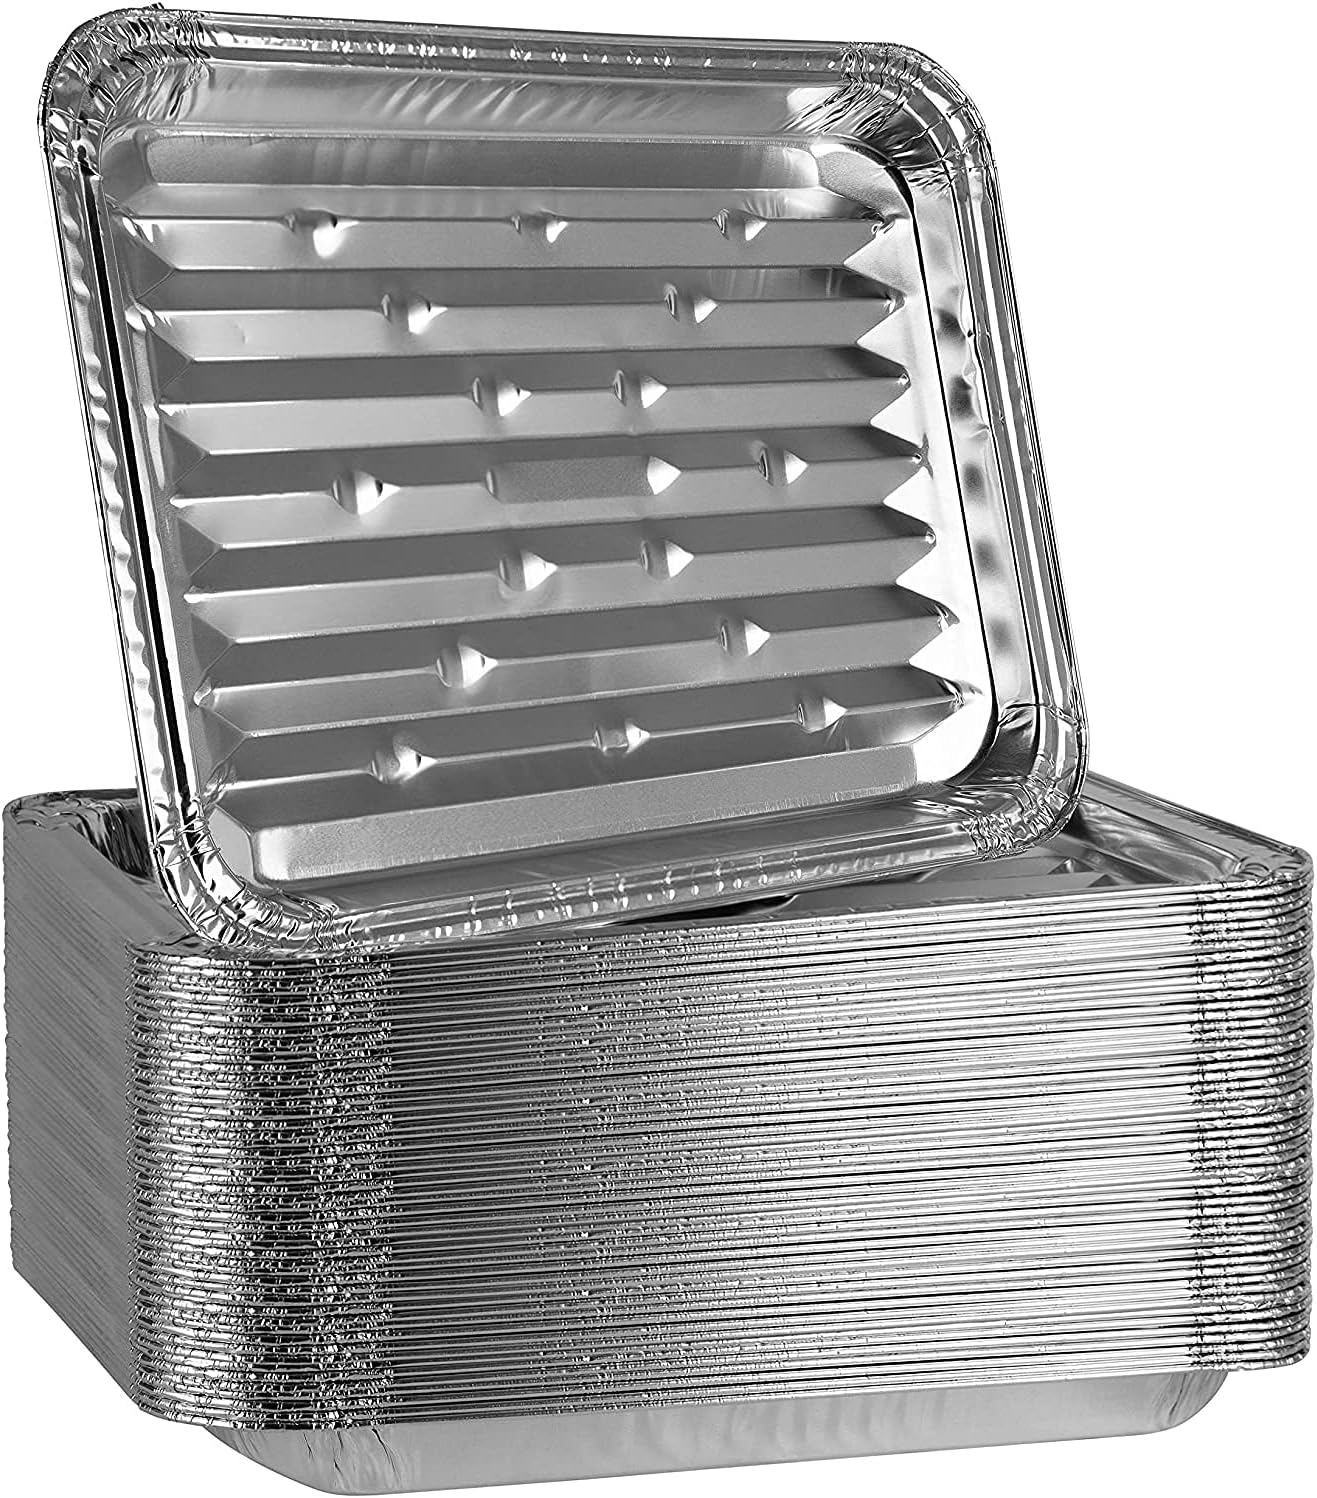 Plasticpro Aluminum Grill Pans, Broiler Pans, Grill Liners, Durable with Ribbed Bottom Surface for BBQ, Grill, Texture Disposable, (50)